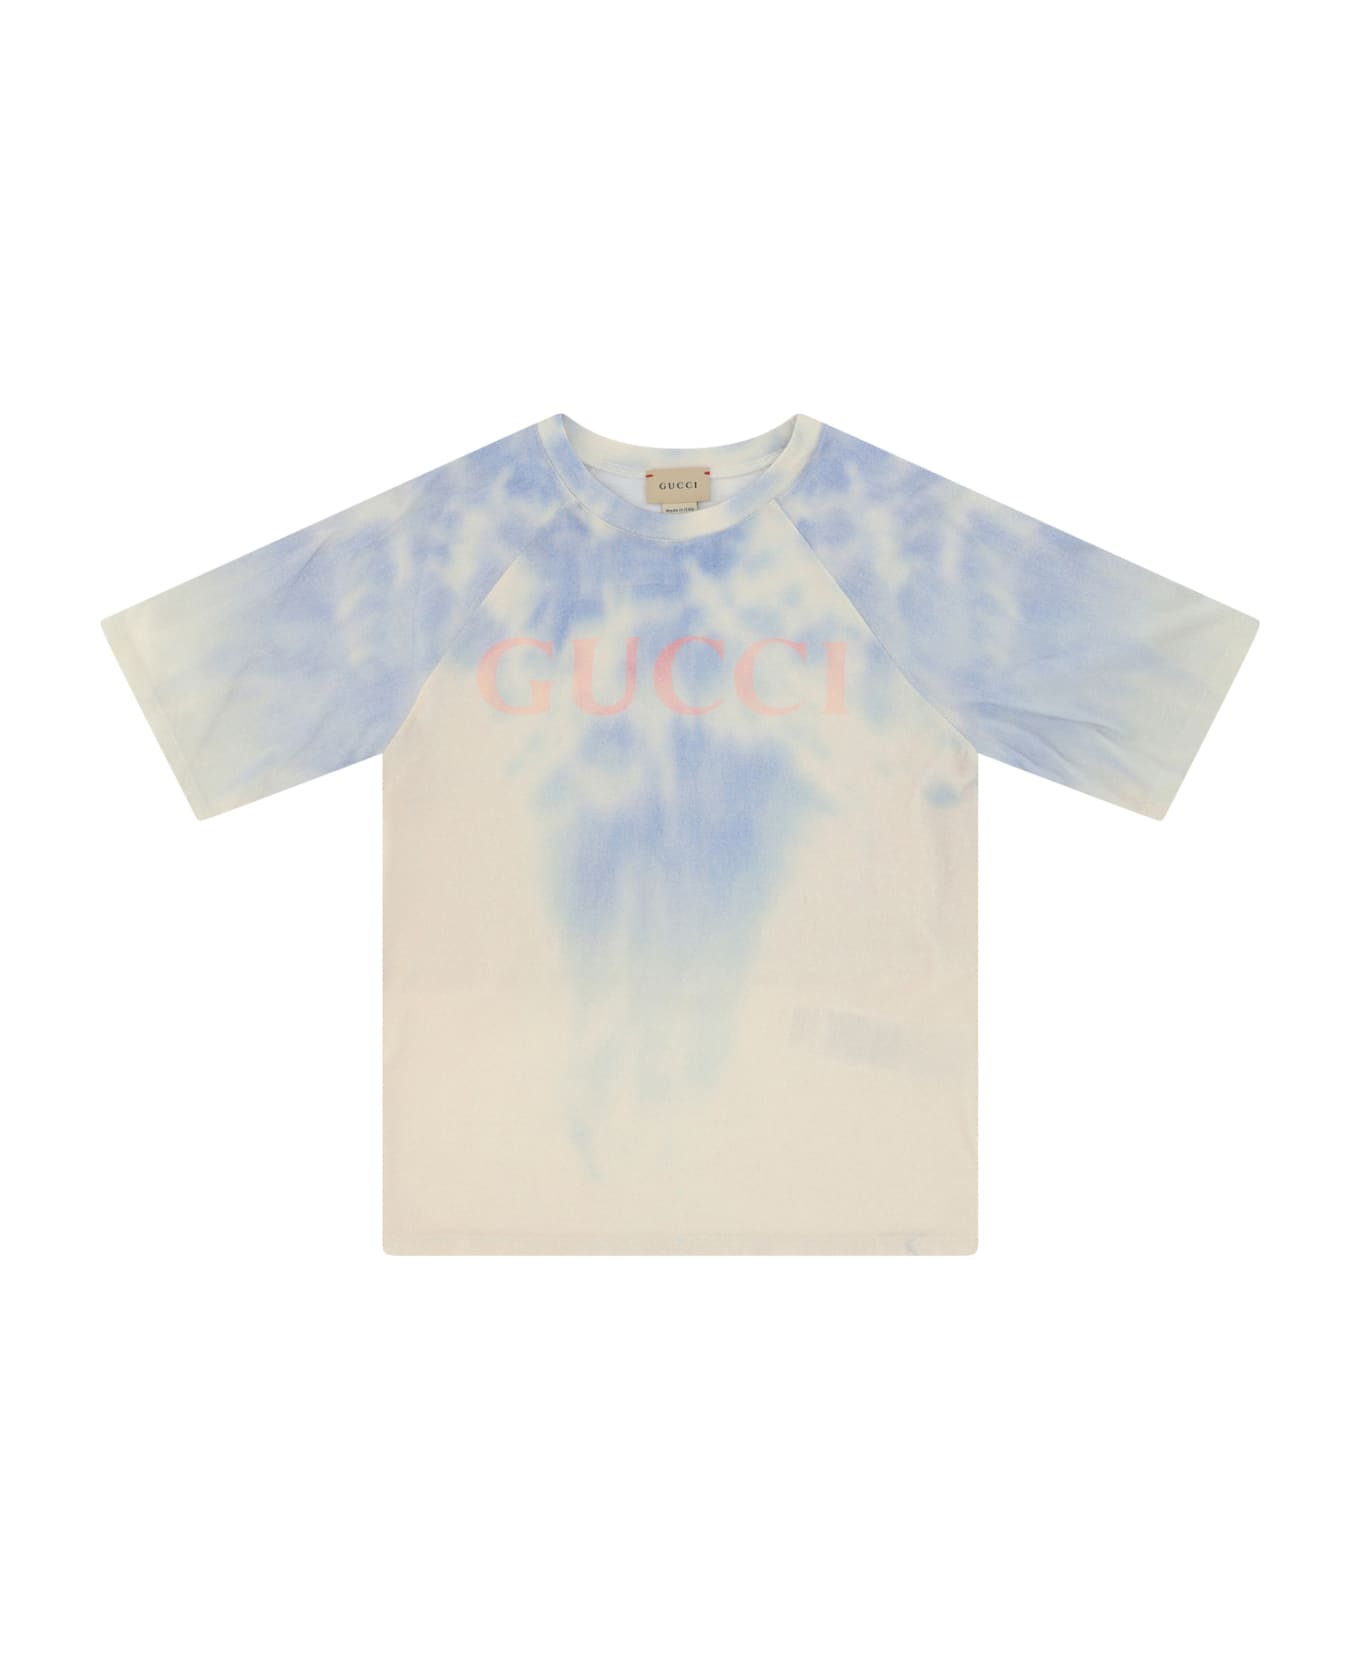 Gucci T-shirt For Boy - Dusty White/blue トップス